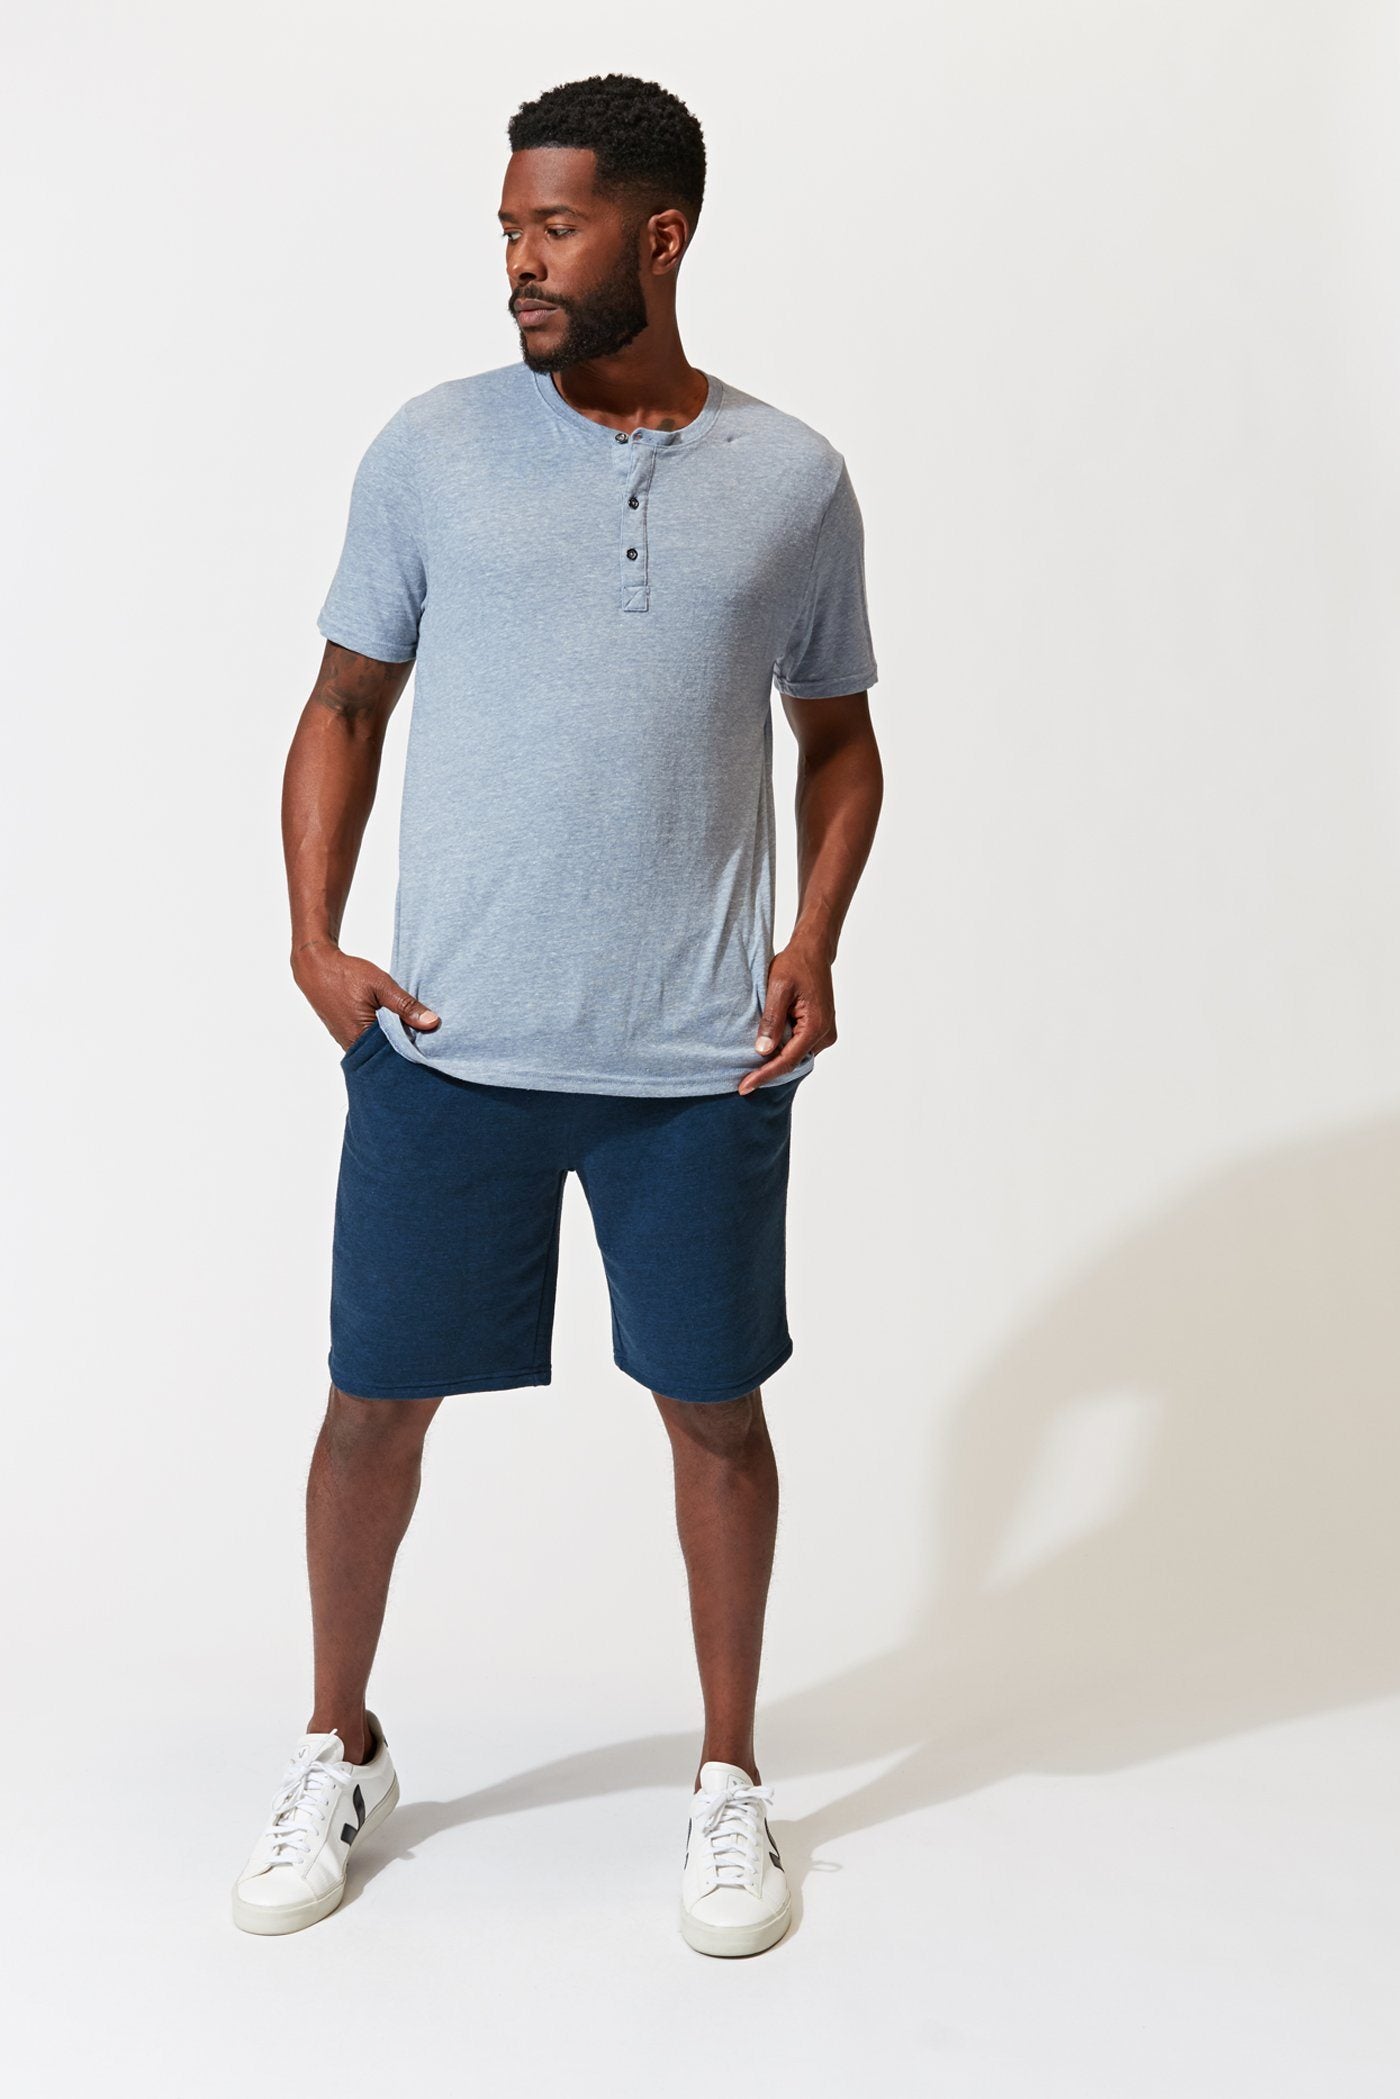 Triblend Henley Mens Tops Threads 4 Thought